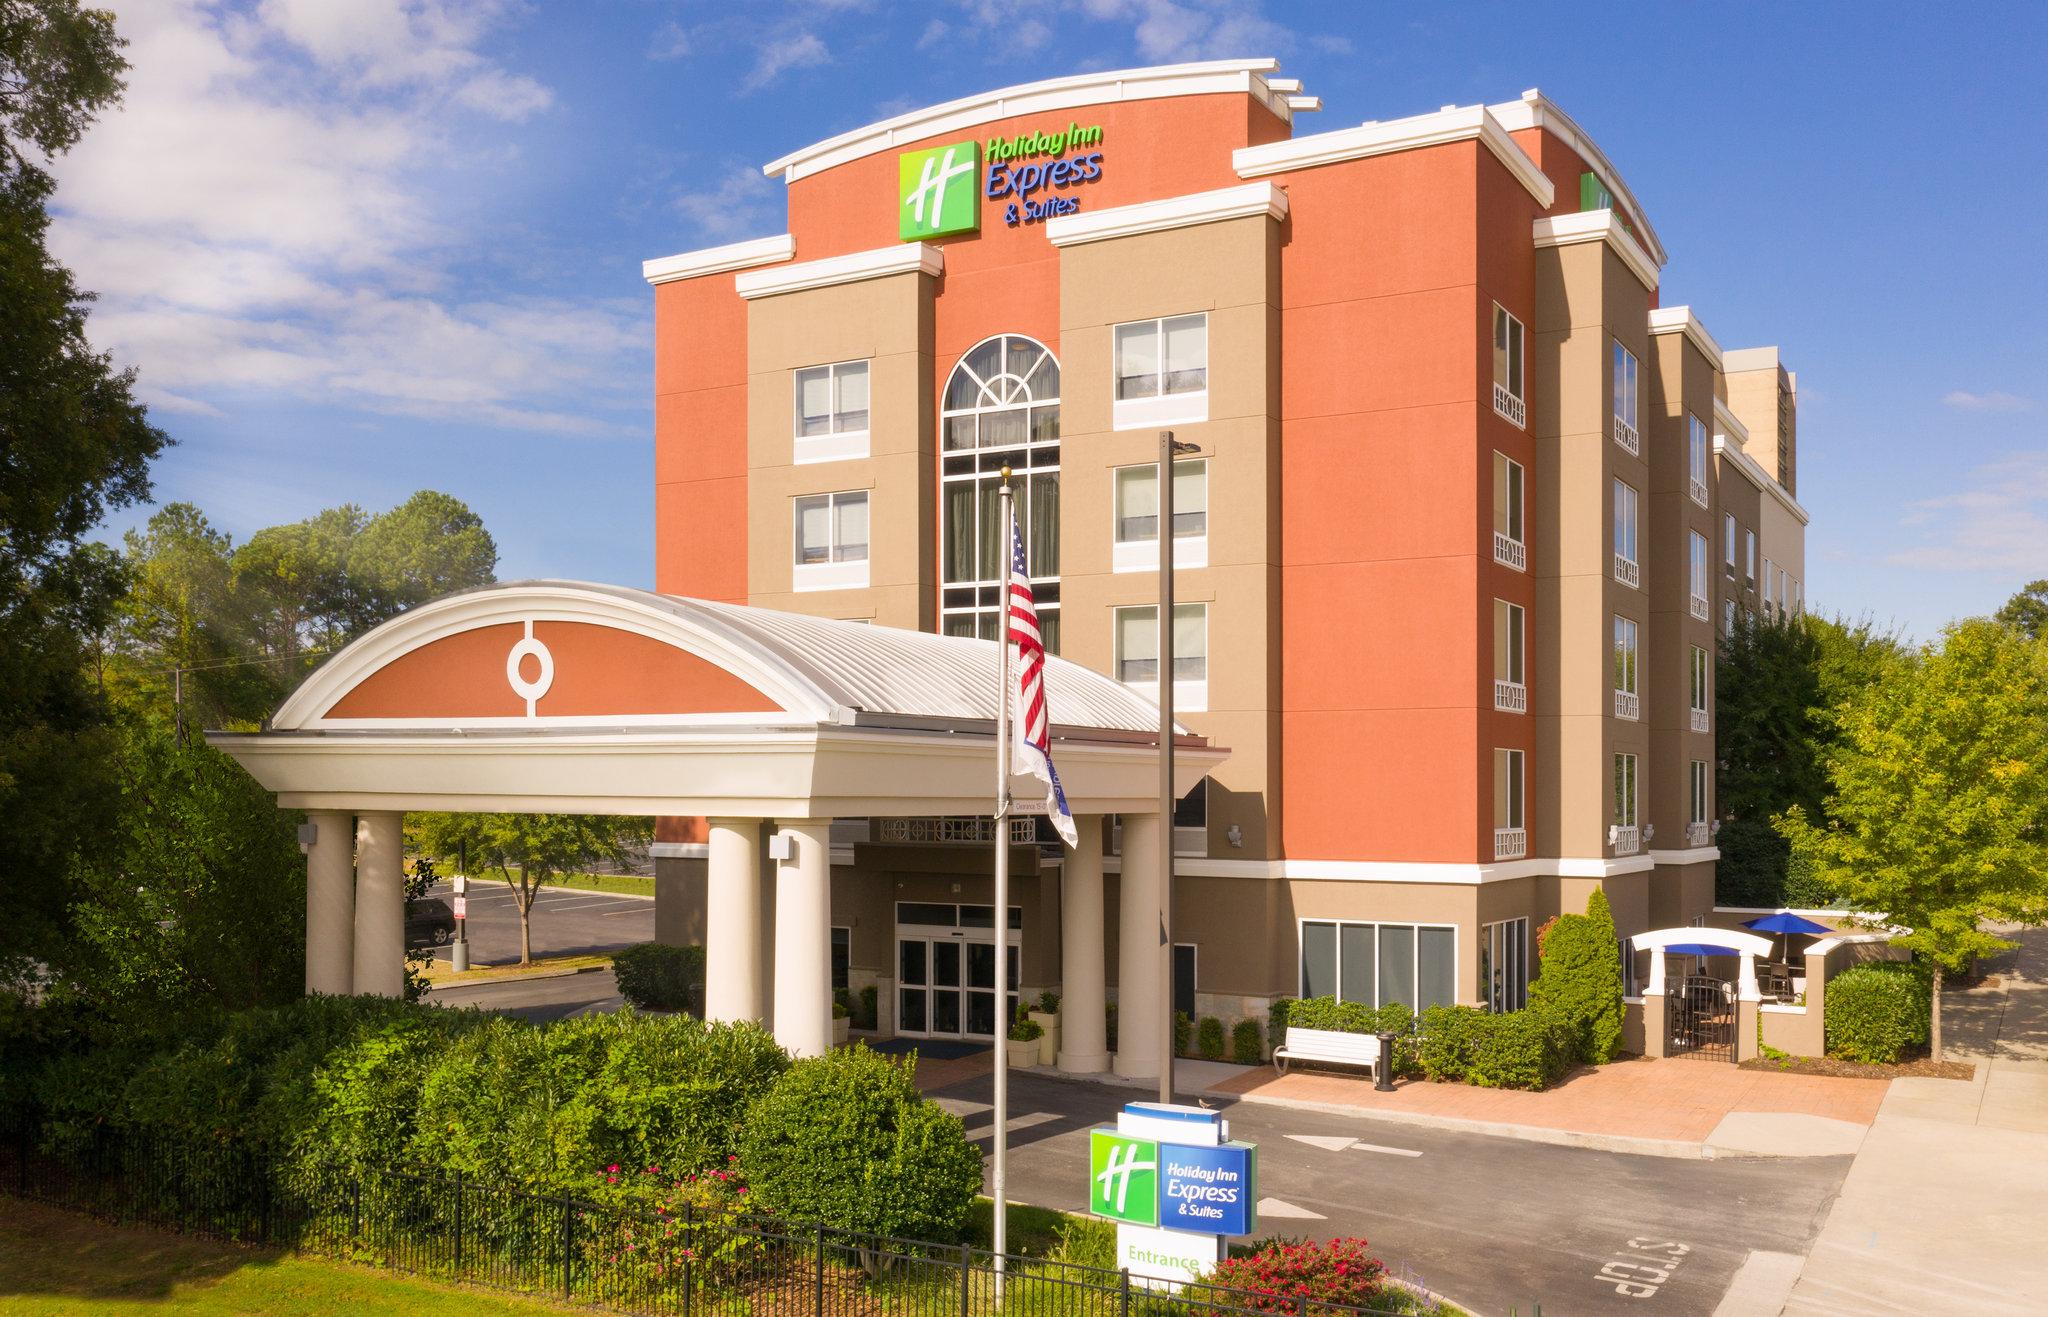 Holiday Inn Express & Suites Chattanooga Downtown in Chattanooga, TN